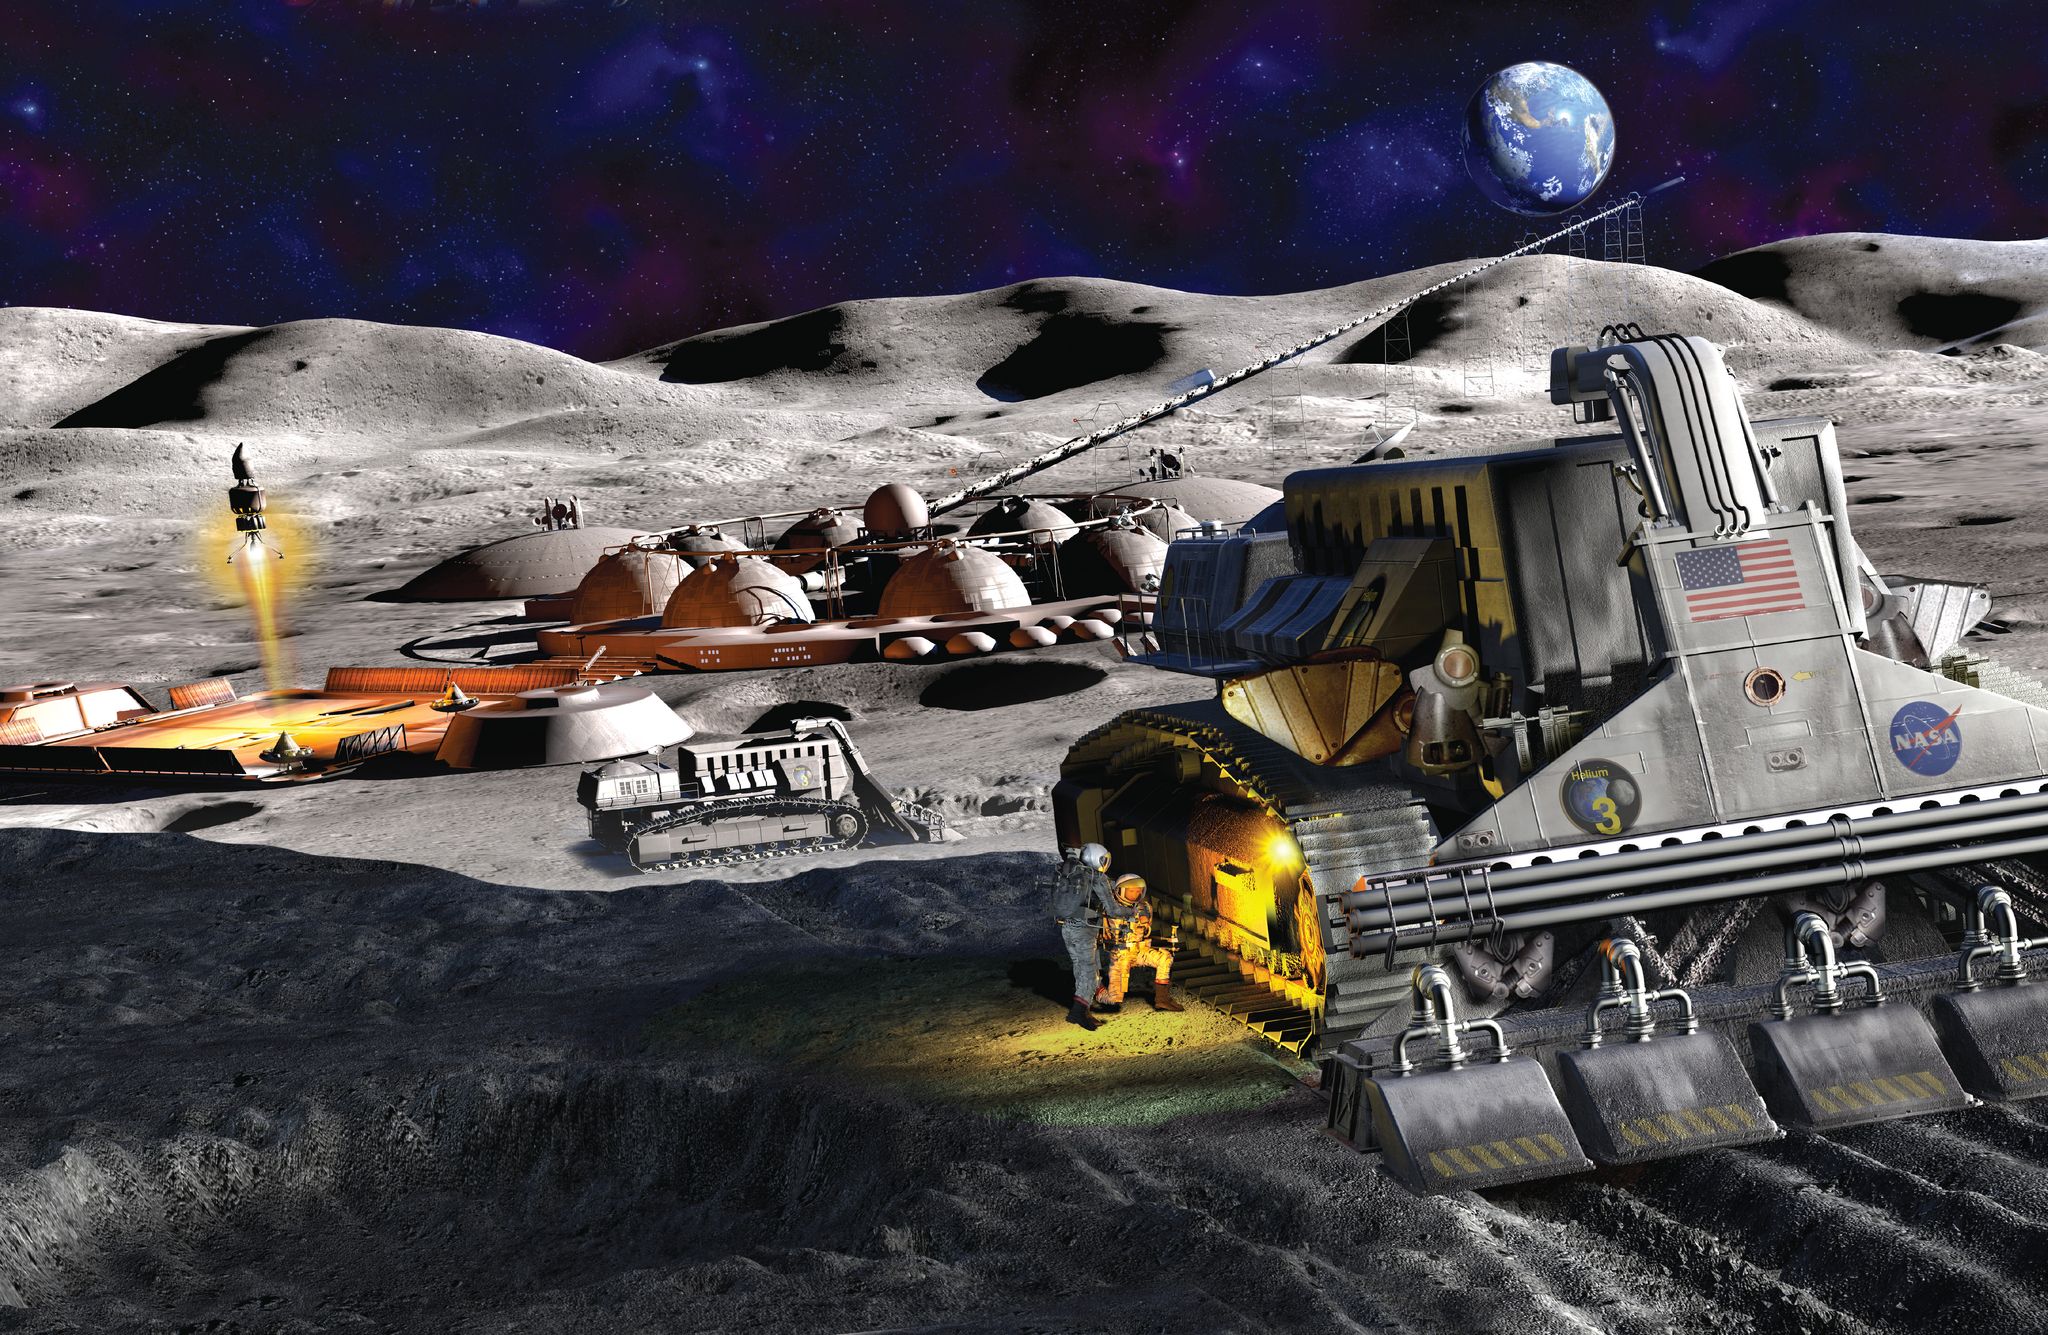 Why Mining the Moon Seems Possible | Moon Mining History